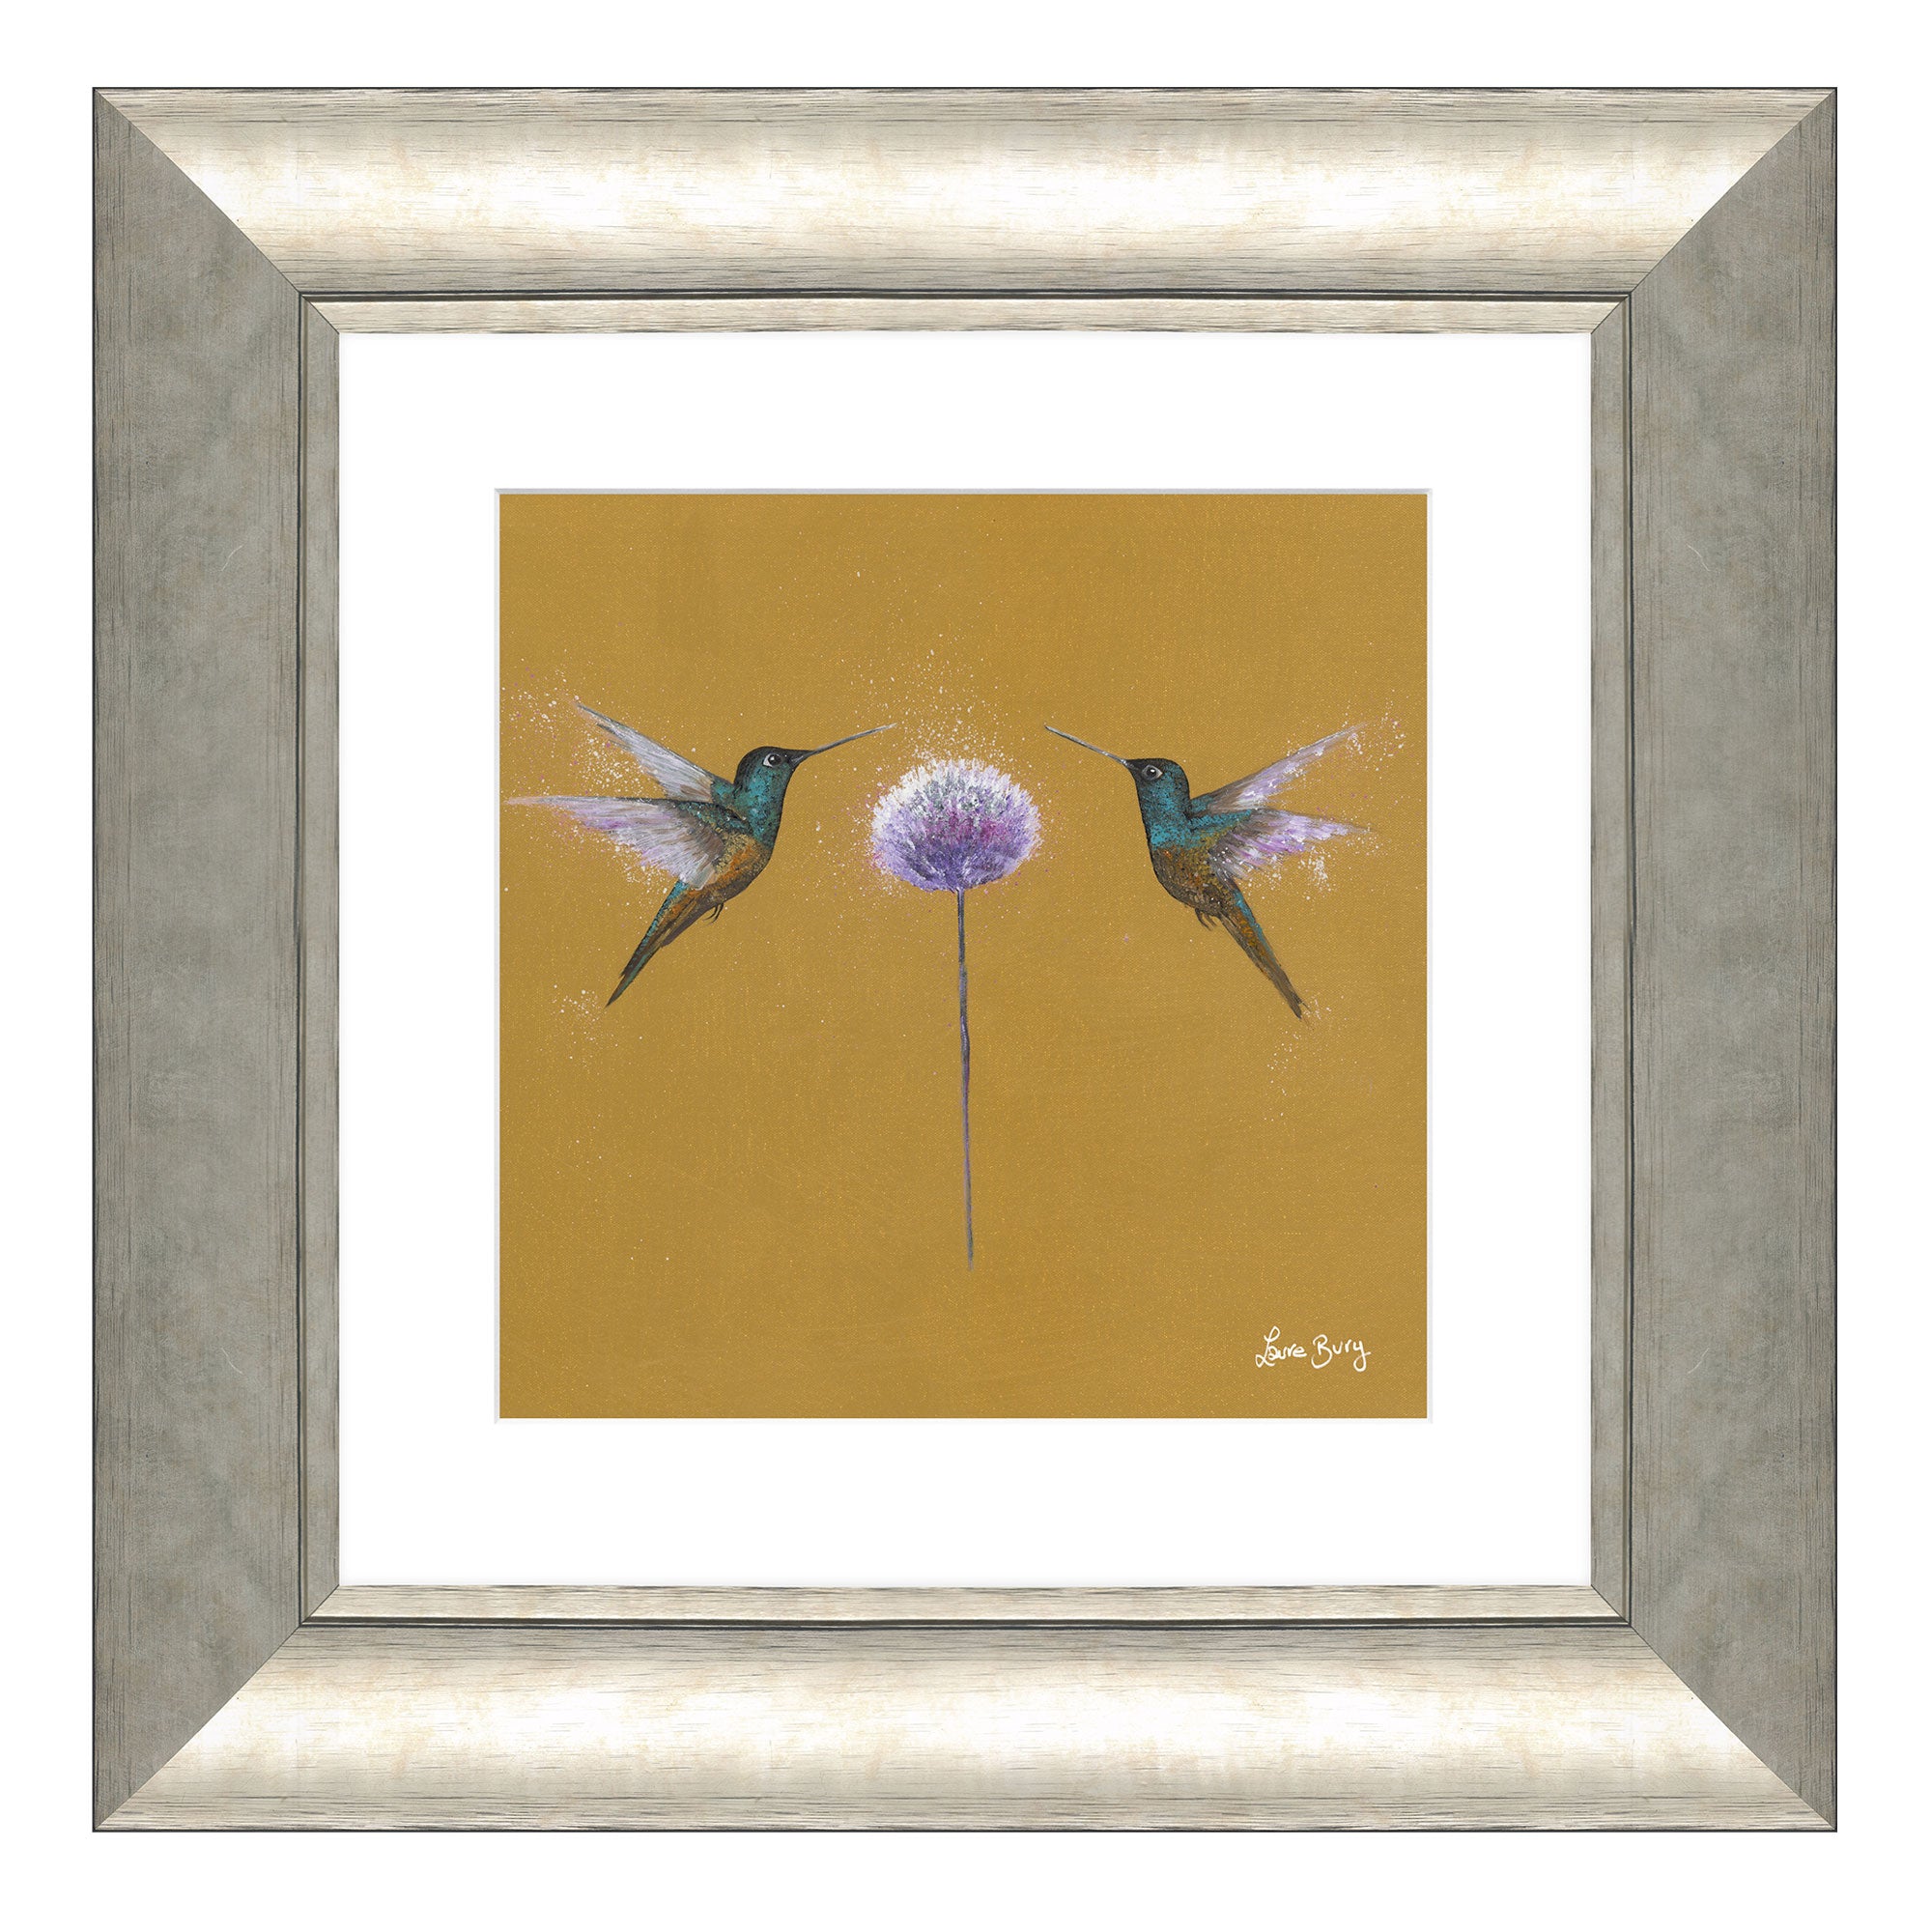 We Are Golden - Framed Print By Laure Bury